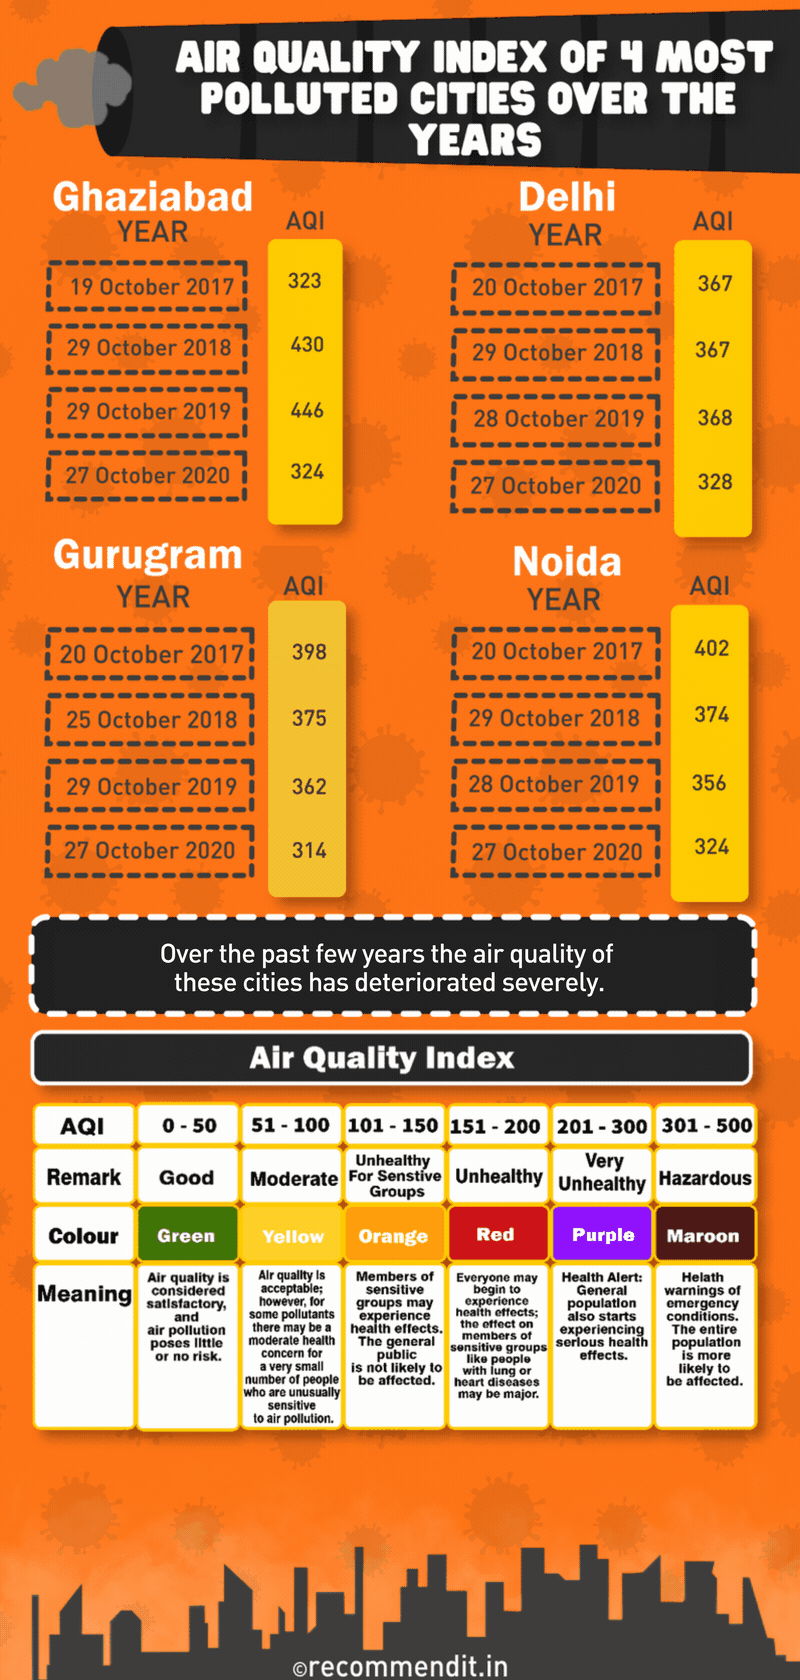 air quality index of 4 most polluted cities over the years